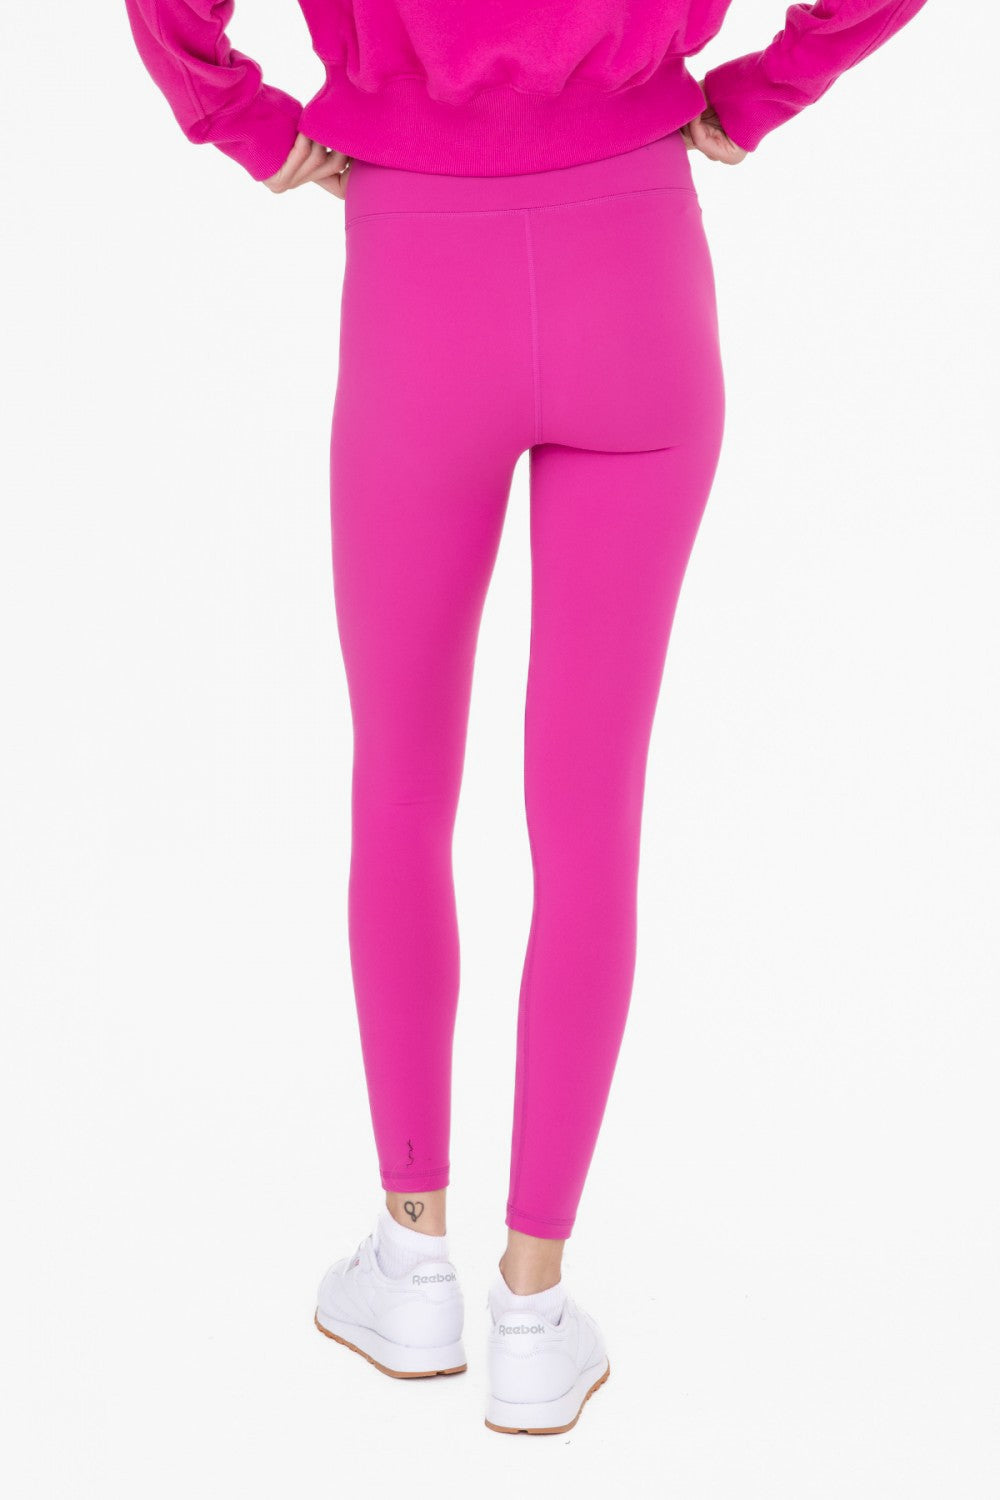 Tapered Band Solid Leggings with Back Pockets - BP606 – The Sports